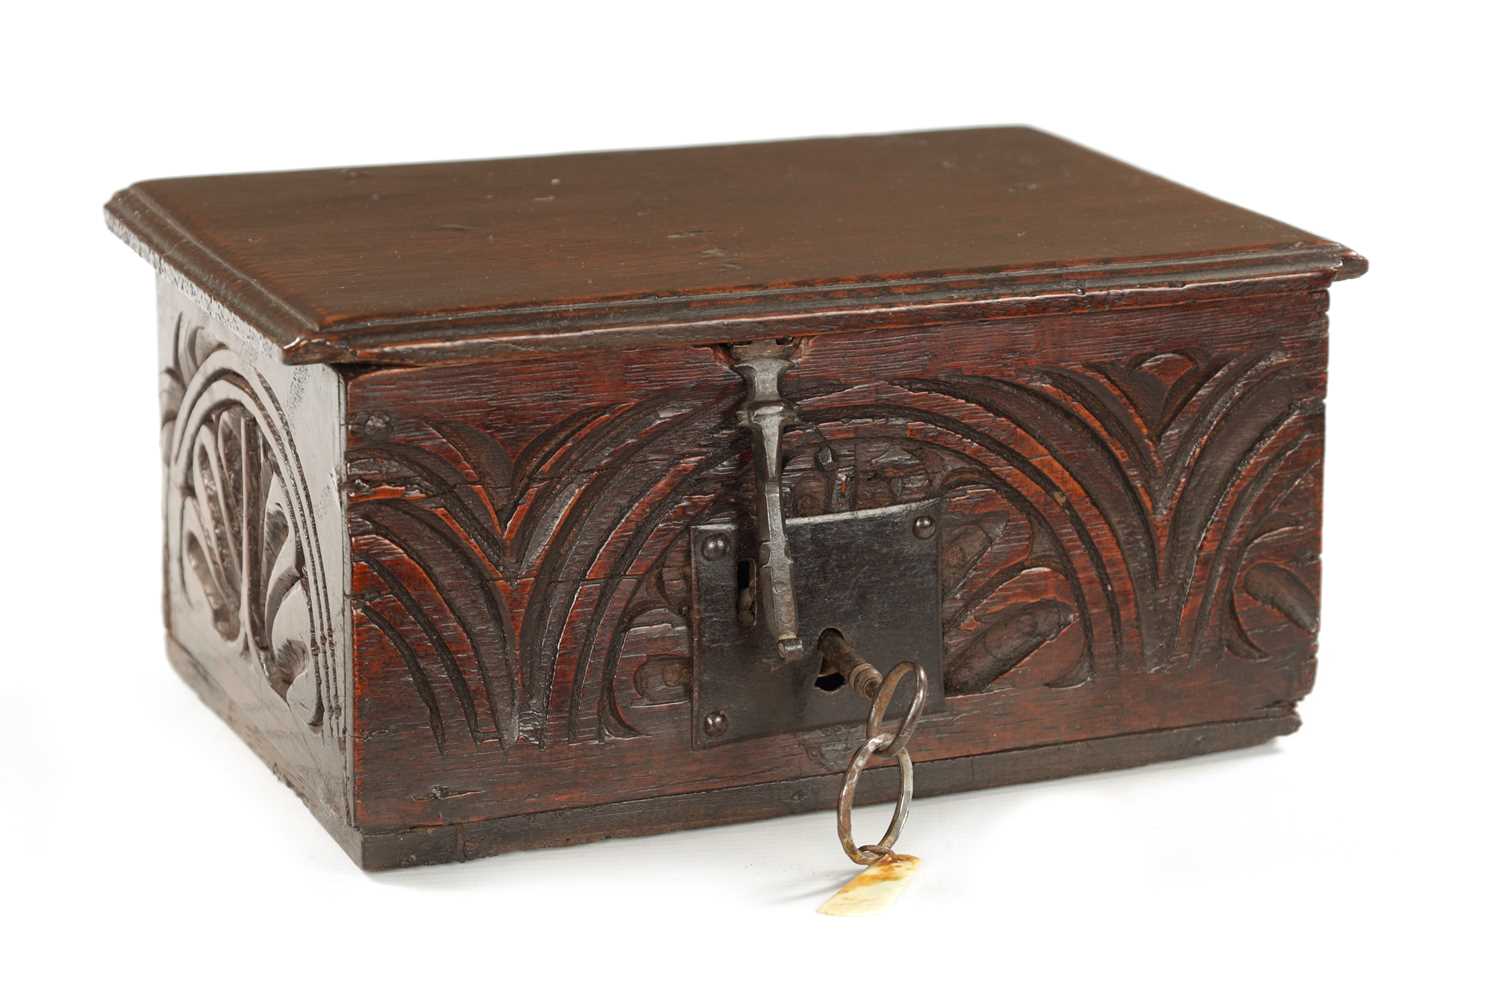 Lot 1099 - A GOOD 17TH CENTURY UNUSUALLY SMALL OAK BIBLE BOX OF FINE COLOUR AND PATINA